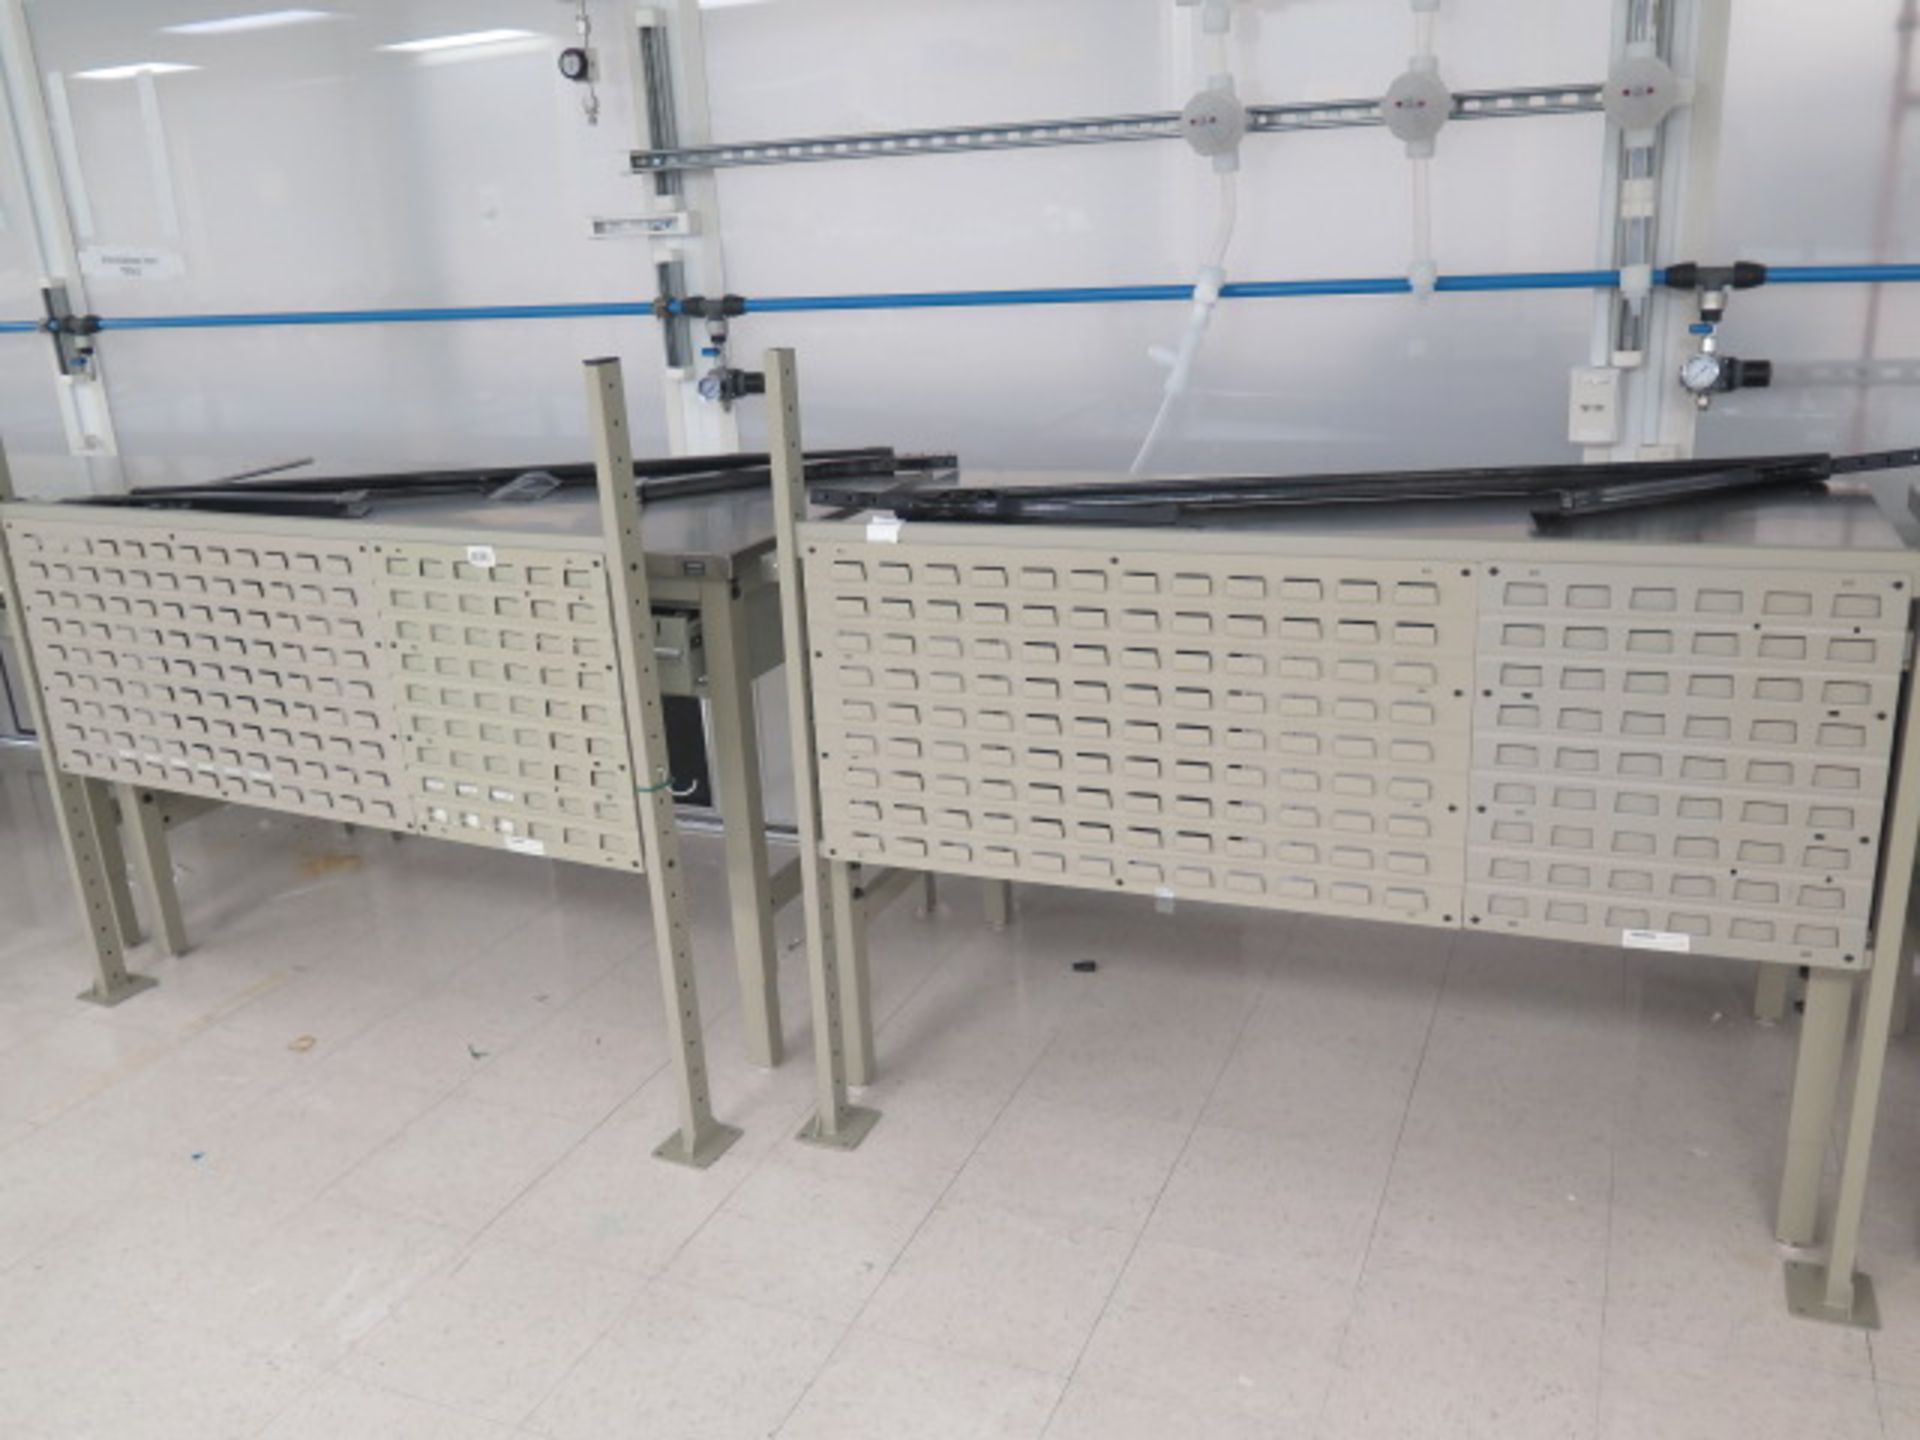 Global 30" x 60" Stainless Top Lab Benches (2) w/ Back-Boards (SOLD AS-IS - NO WARRANTY) - Image 2 of 6